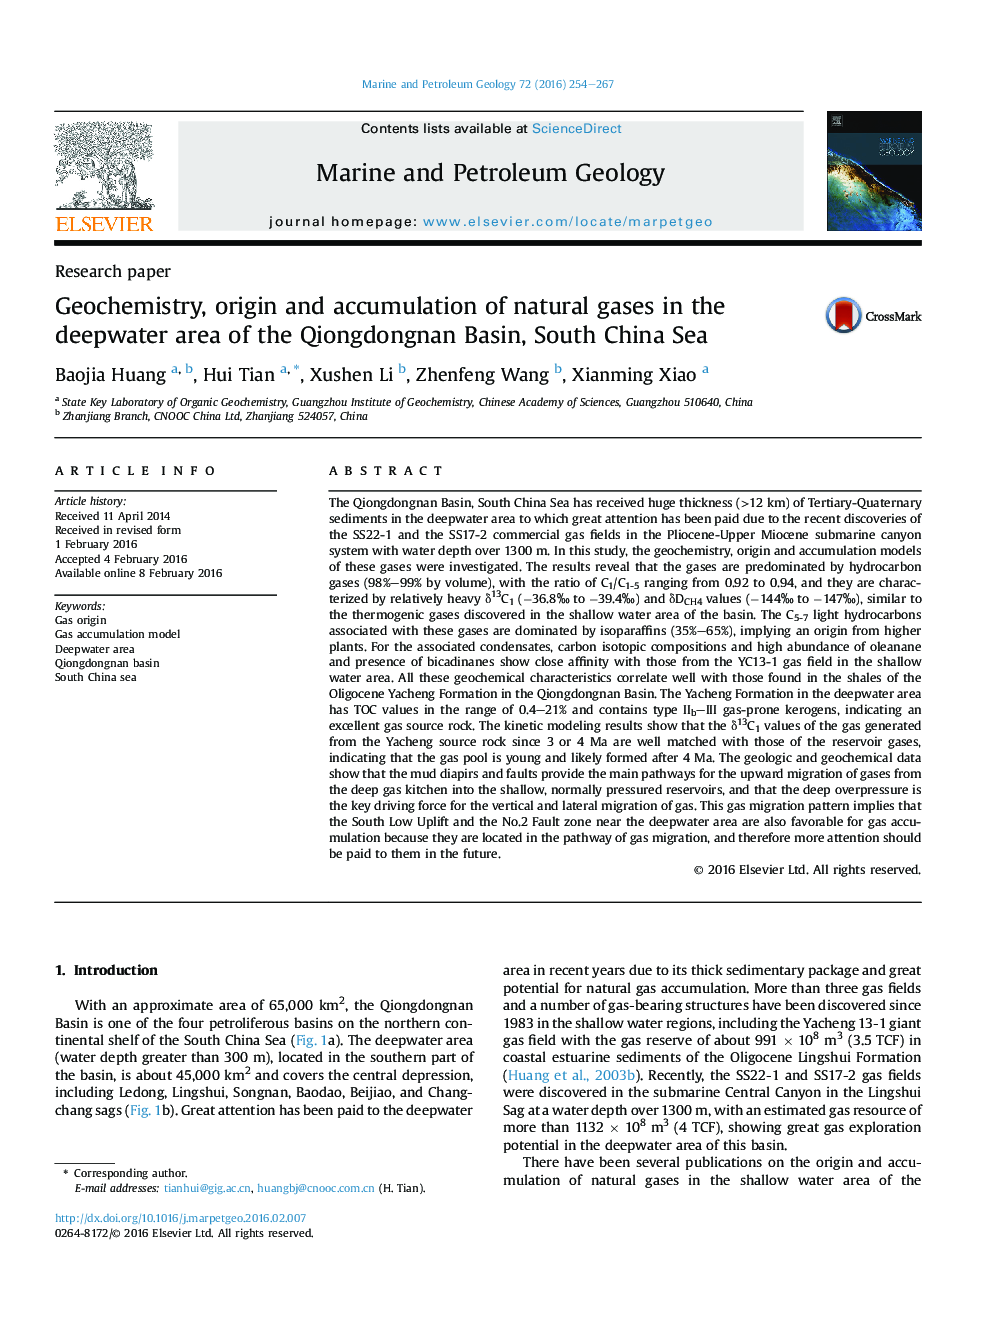 Research paperGeochemistry, origin and accumulation of natural gases in the deepwater area of the Qiongdongnan Basin, South China Sea